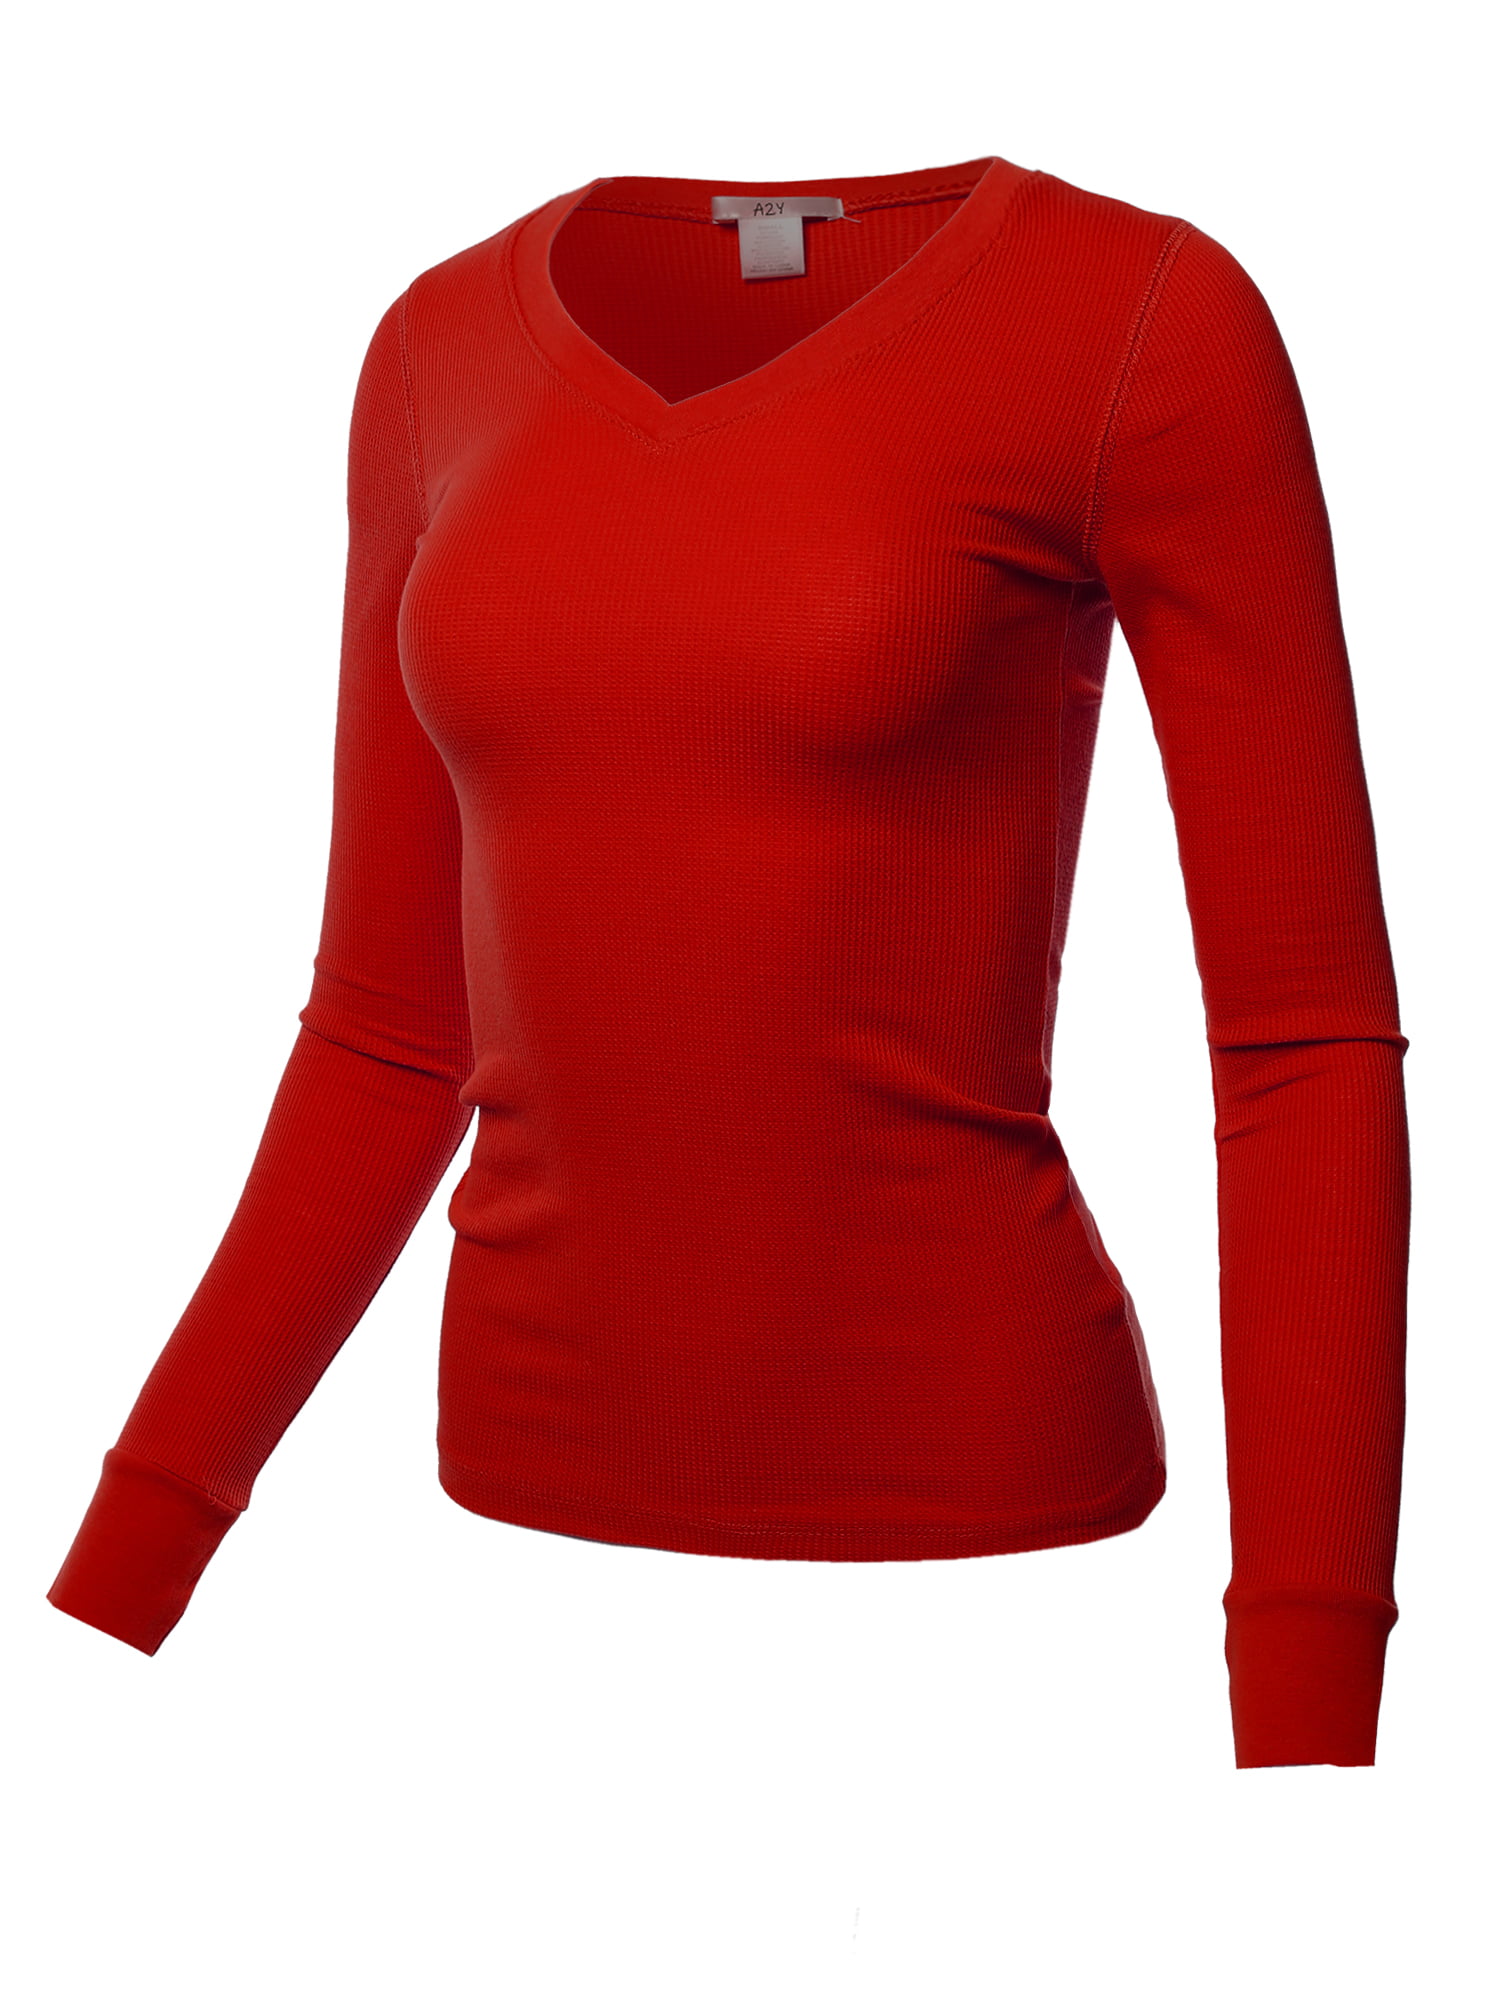 A2Y Women\'s Basic Thermal Top Scarlet Solid V-Neck Long 3XL Shirt Sleeve Fitted Red